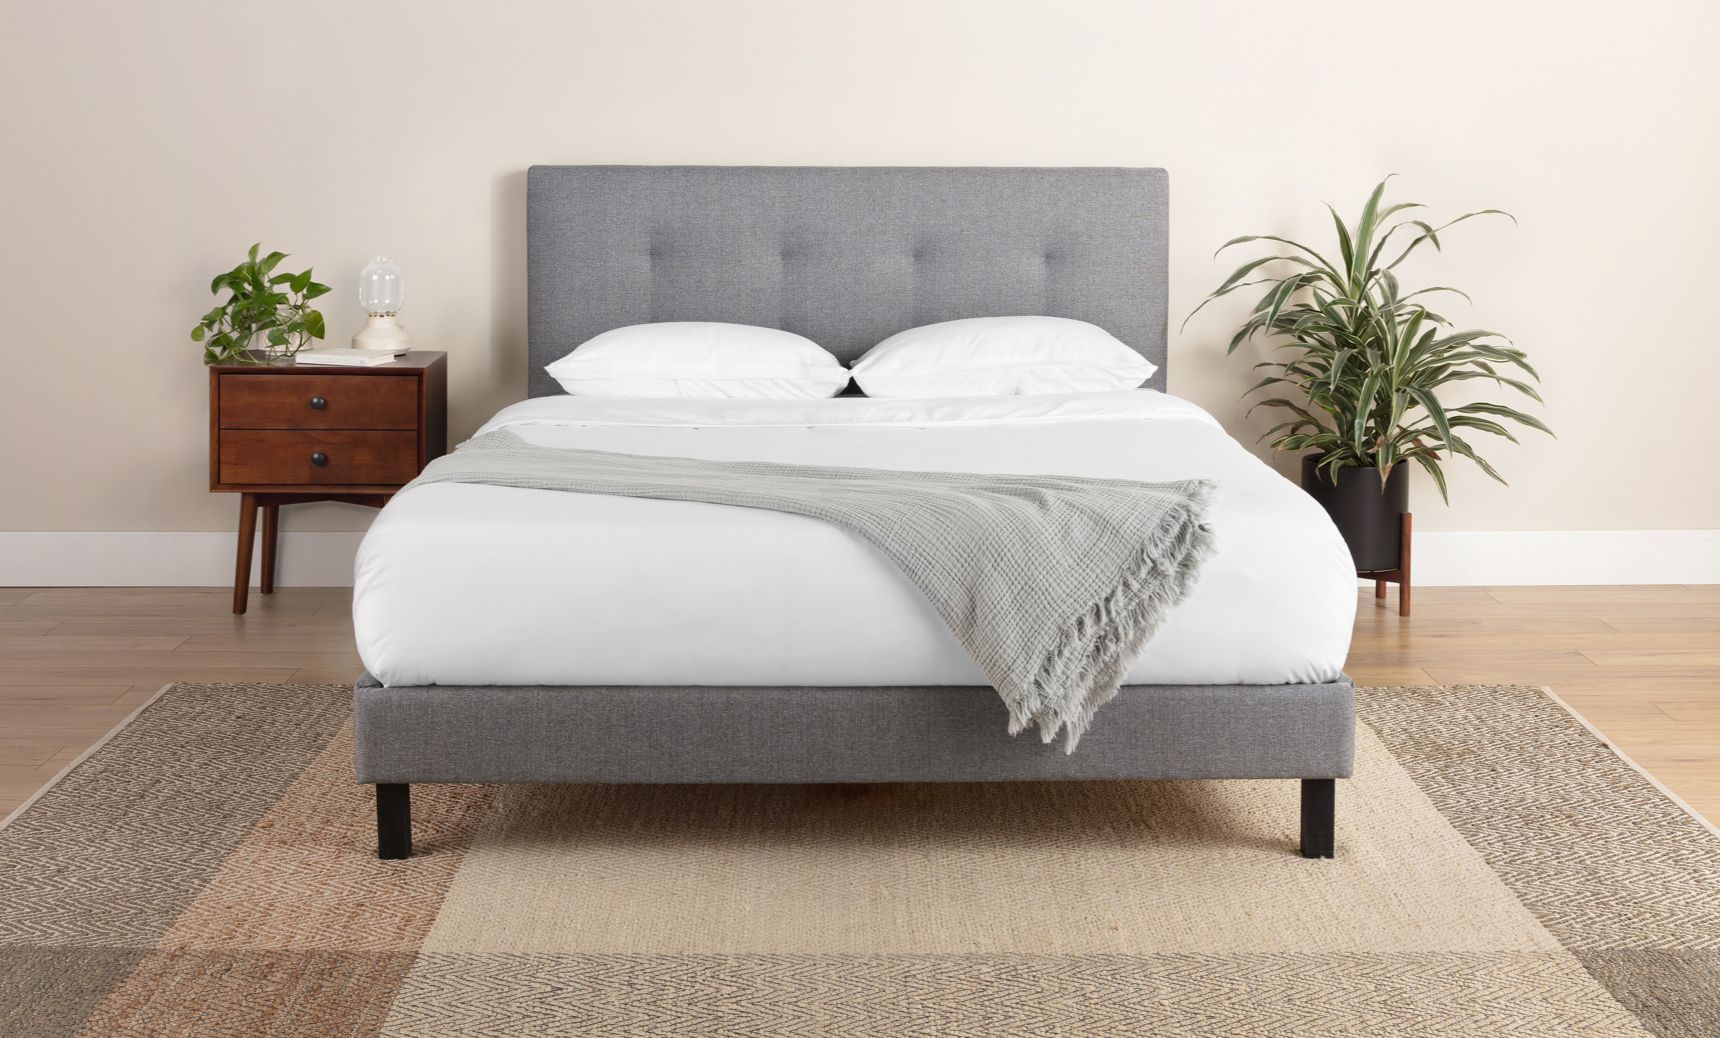 The Endy Upholstered Bed in Heather Grey colourway